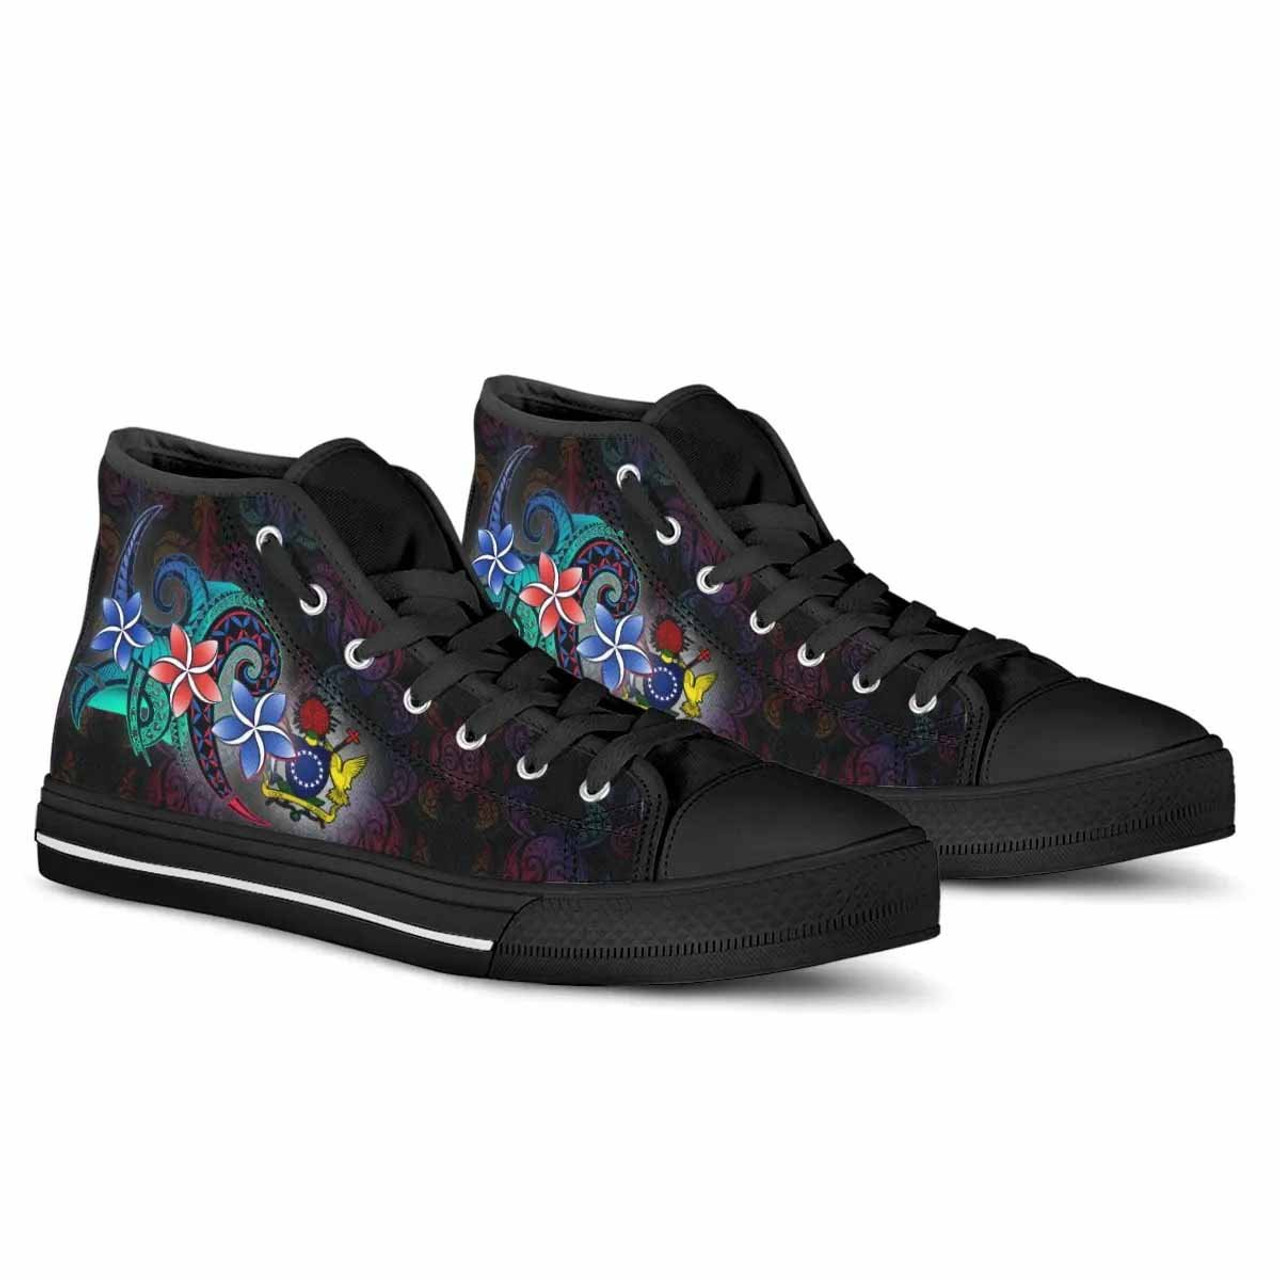 Cook Islands High Top Shoes - Plumeria Flowers Style 4